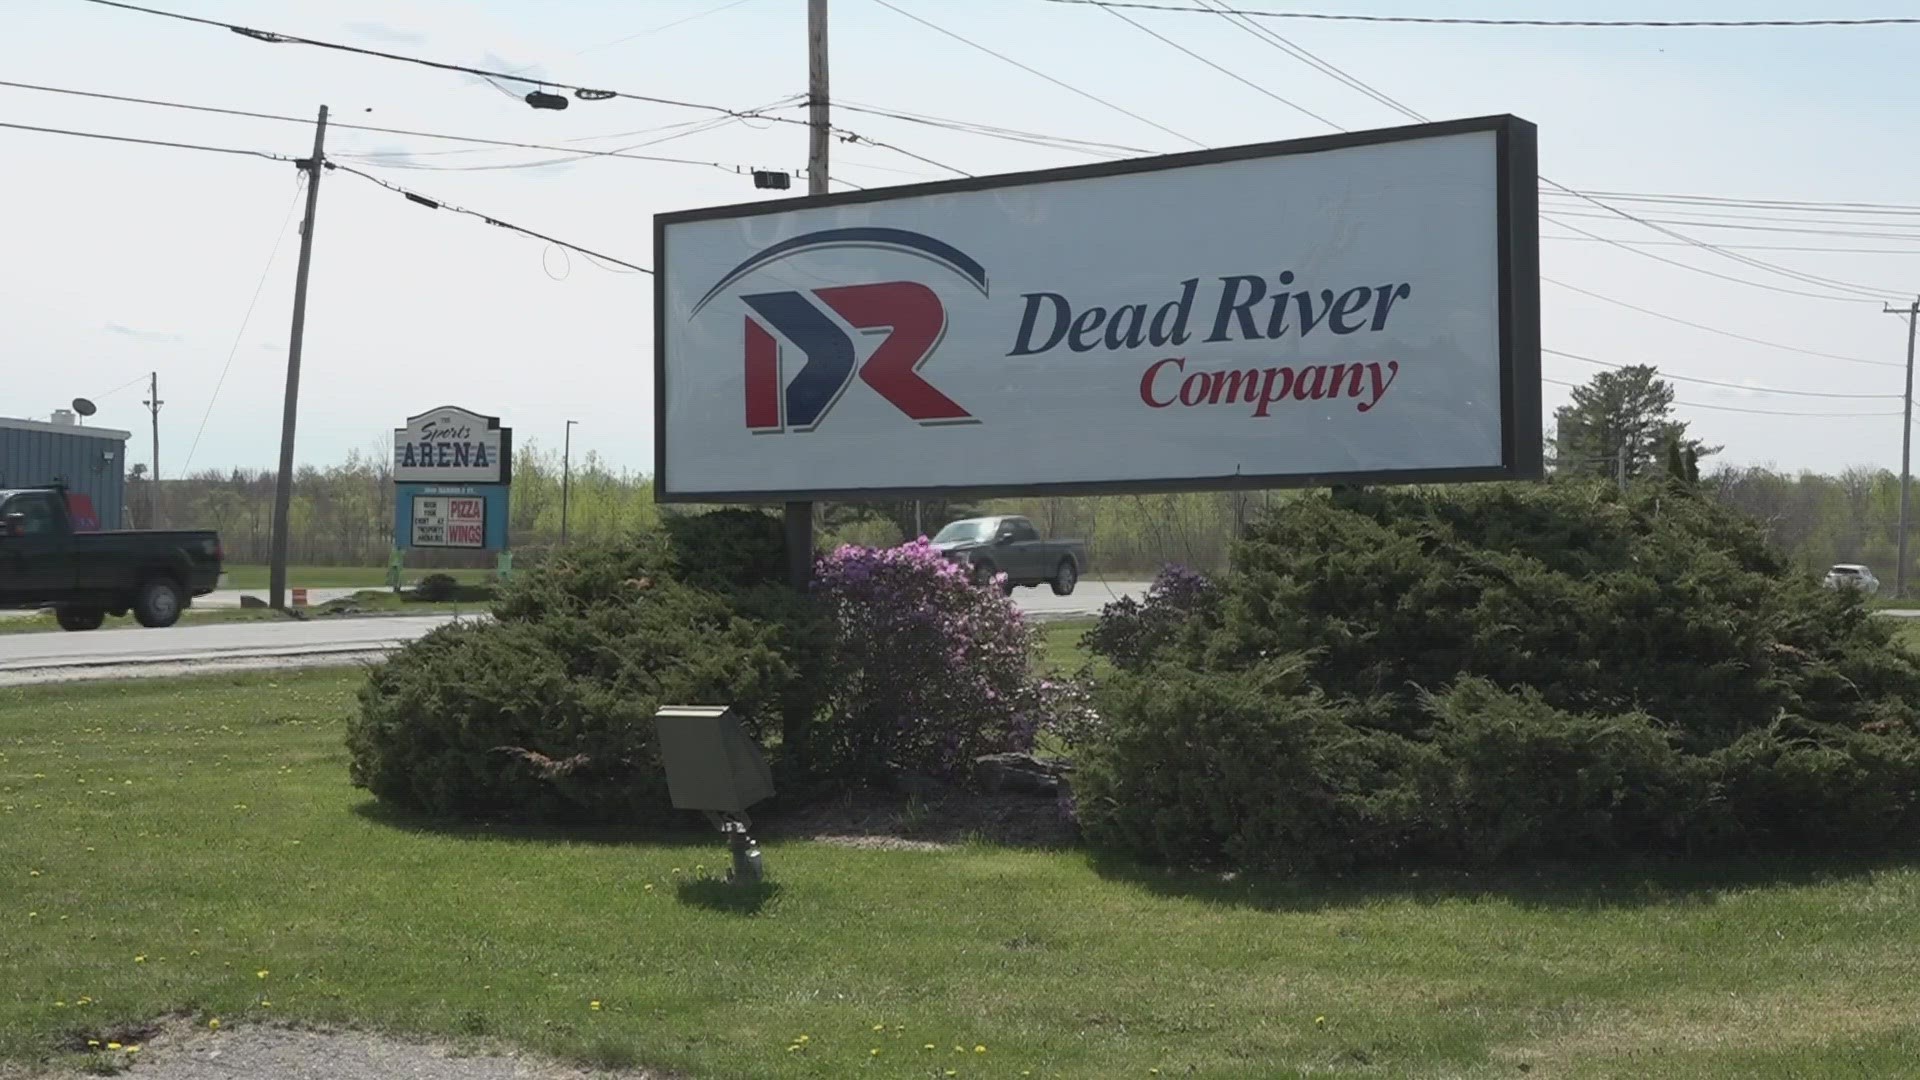 The Dead River Institute offers oil and propane technician apprenticeships, oil-heat technician programs, and delivery driver training.